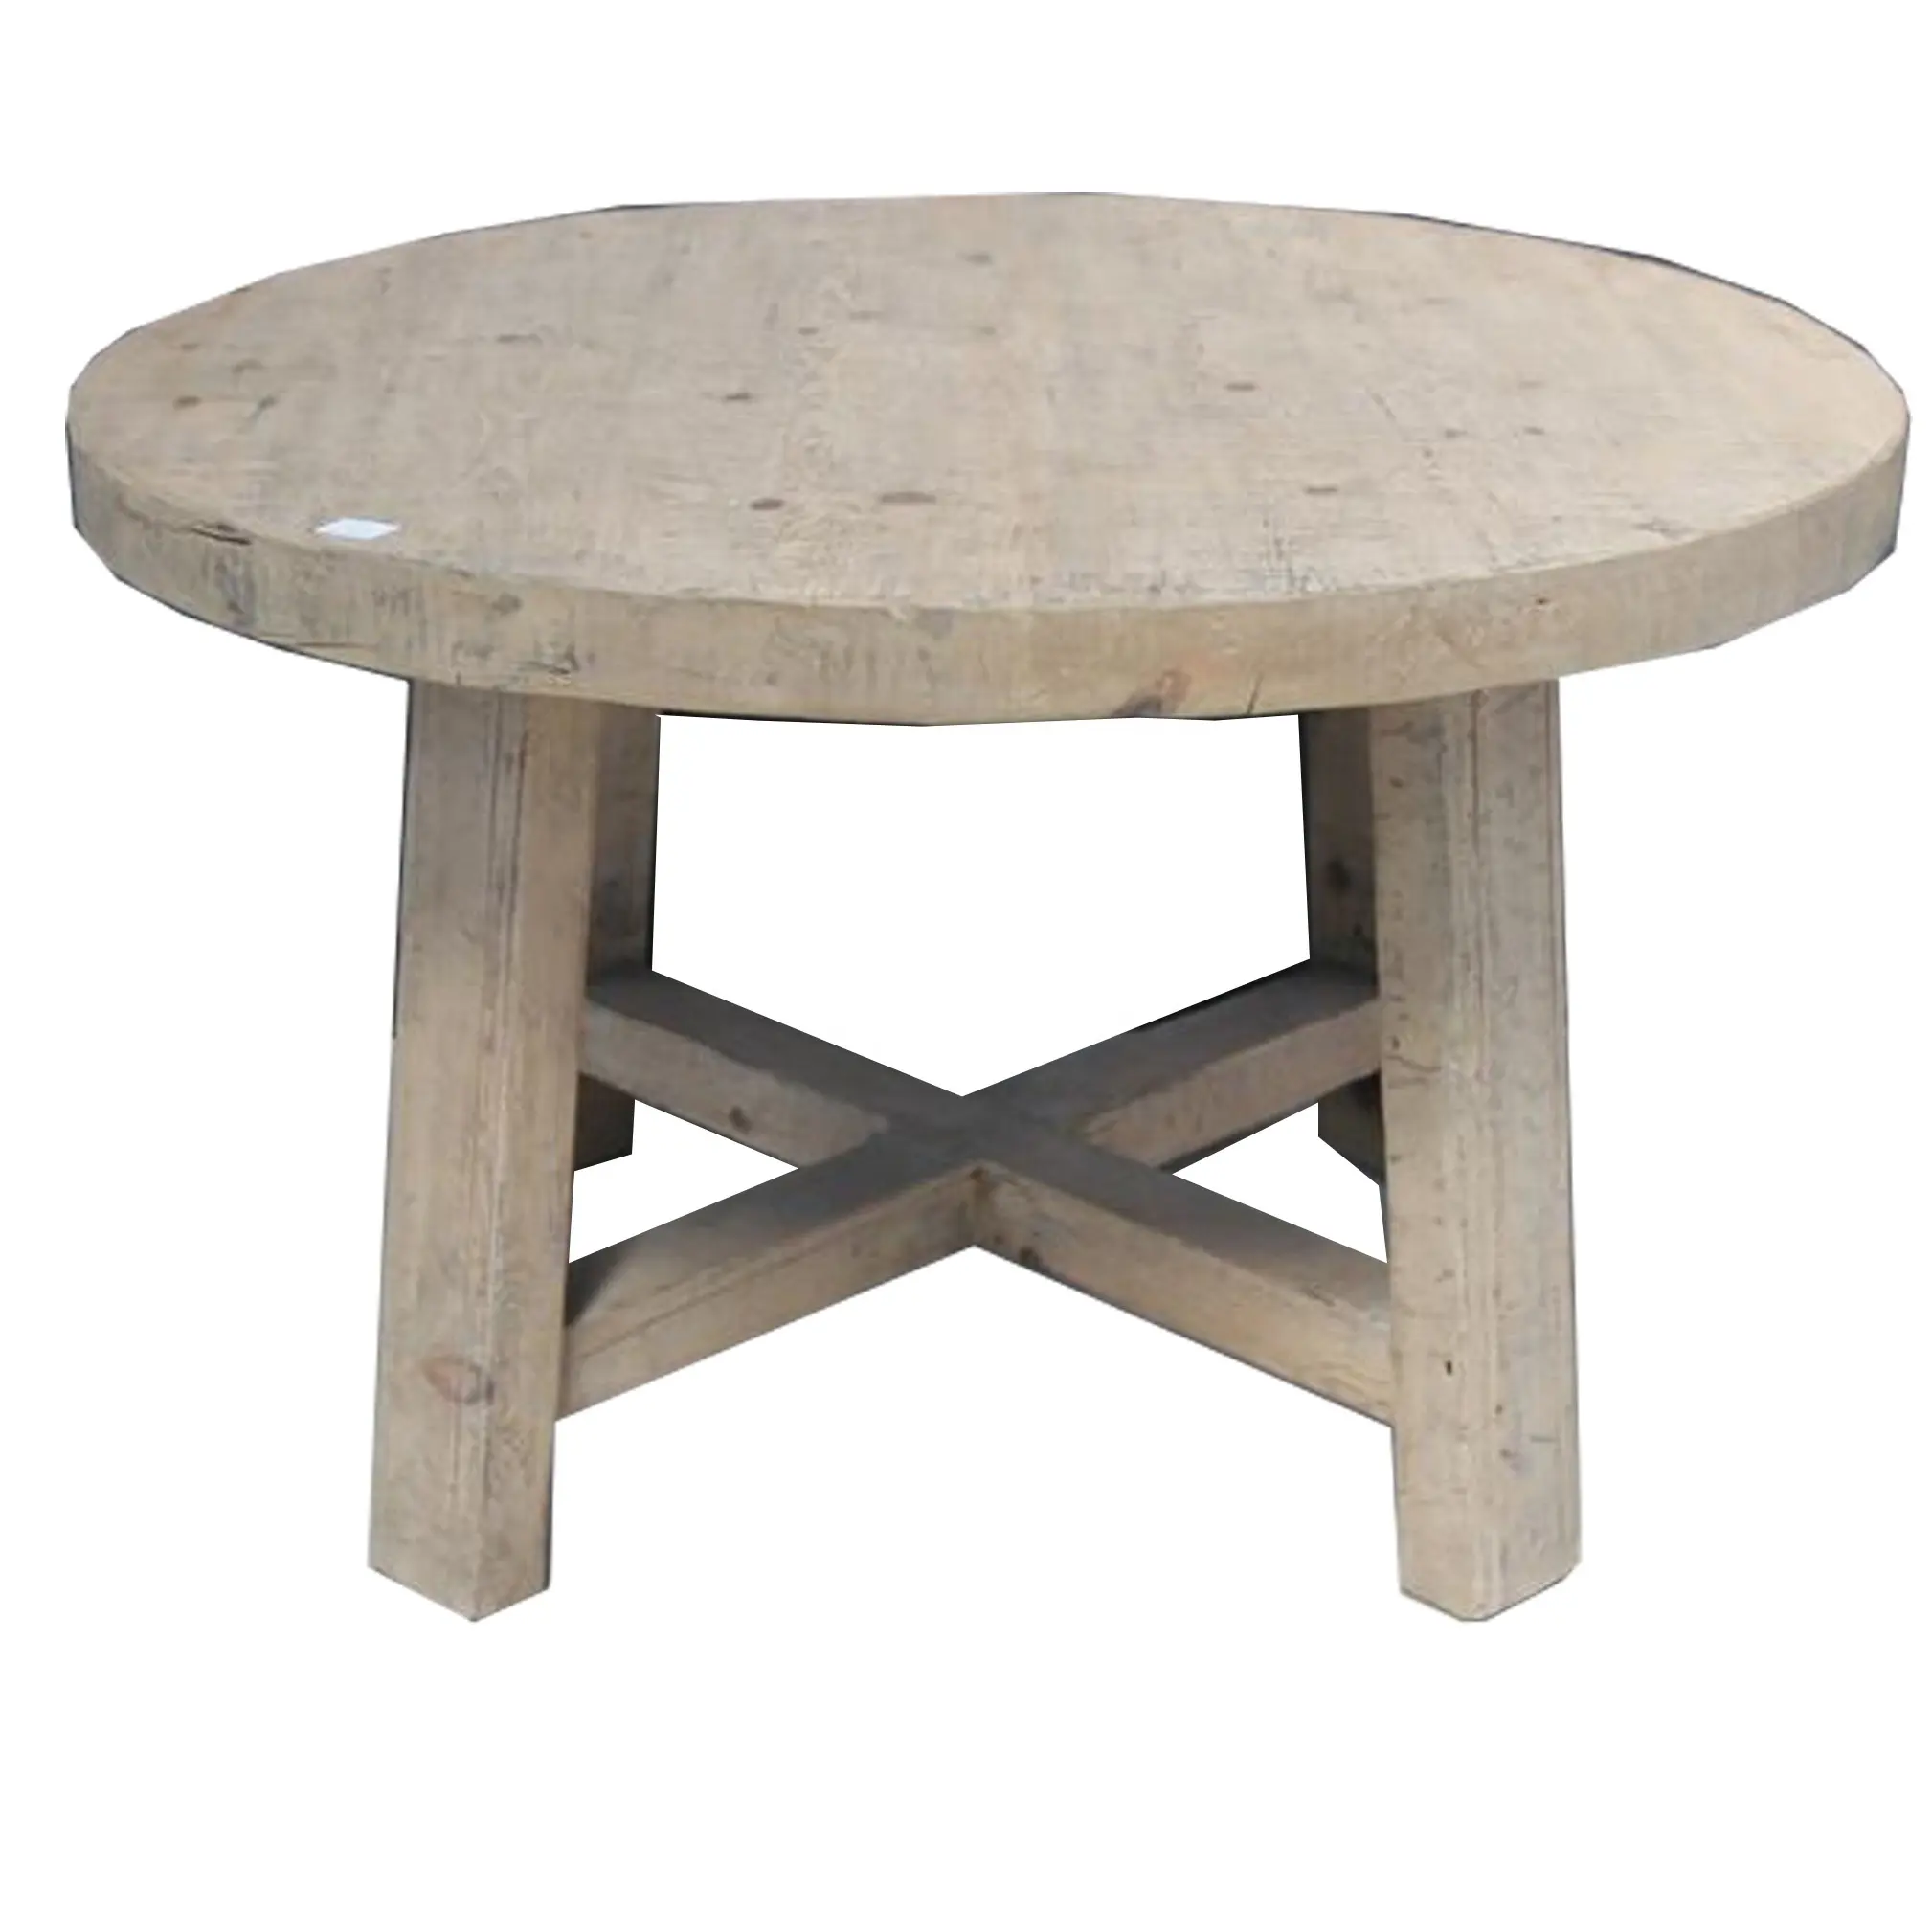 Chinese Wholesale Rustic Recycle Wood Round Dining Table Round KD Dinning Table. Dinning Room Furniture